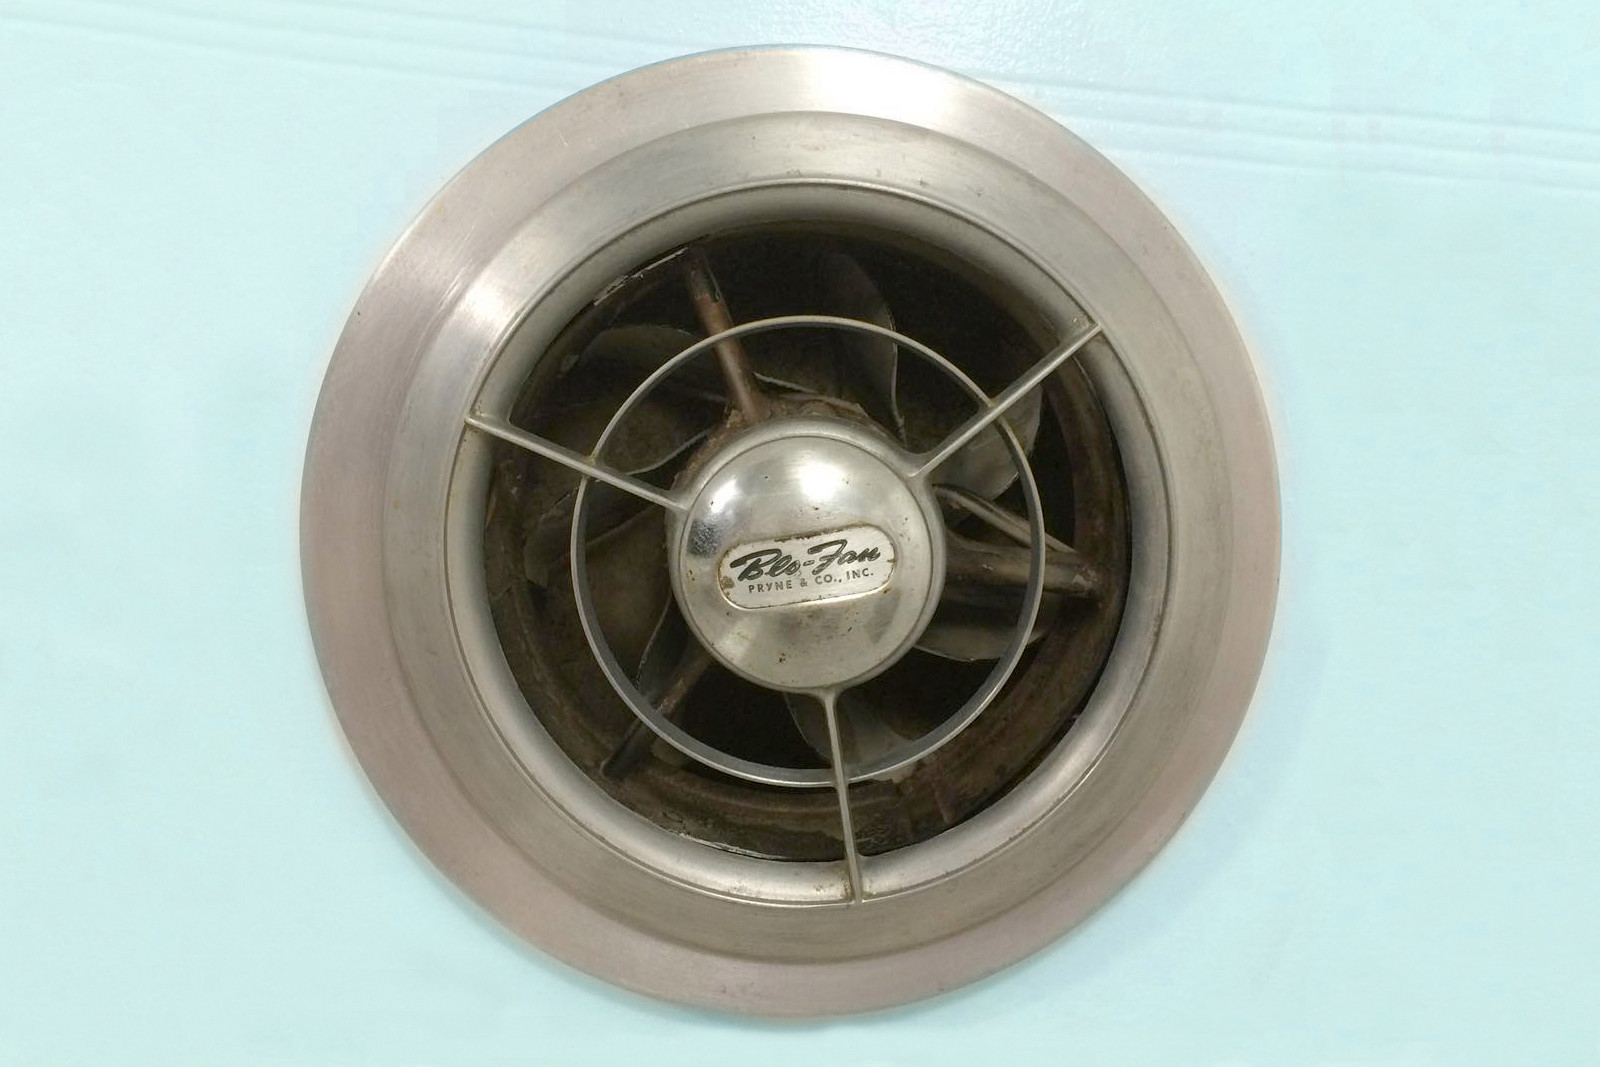 Bathroom Exhaust Fan Installation Cost
 How to Install a Bathroom Exhaust Fan